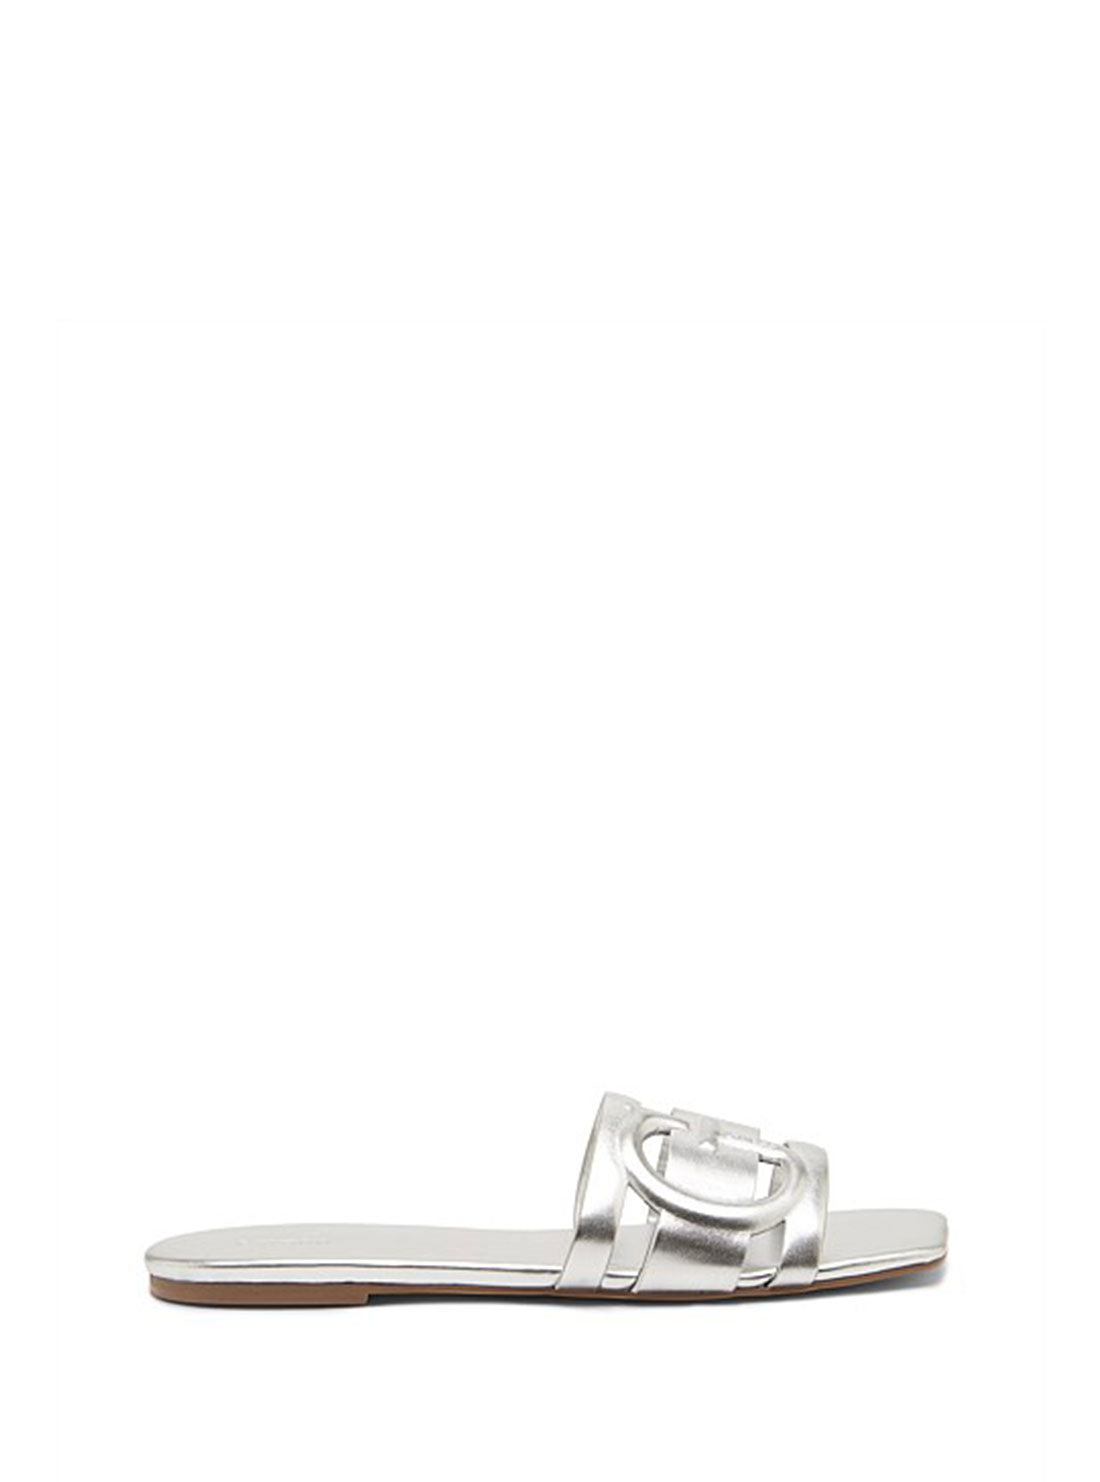 GUESS Womens Silver Caffy Sandals side view